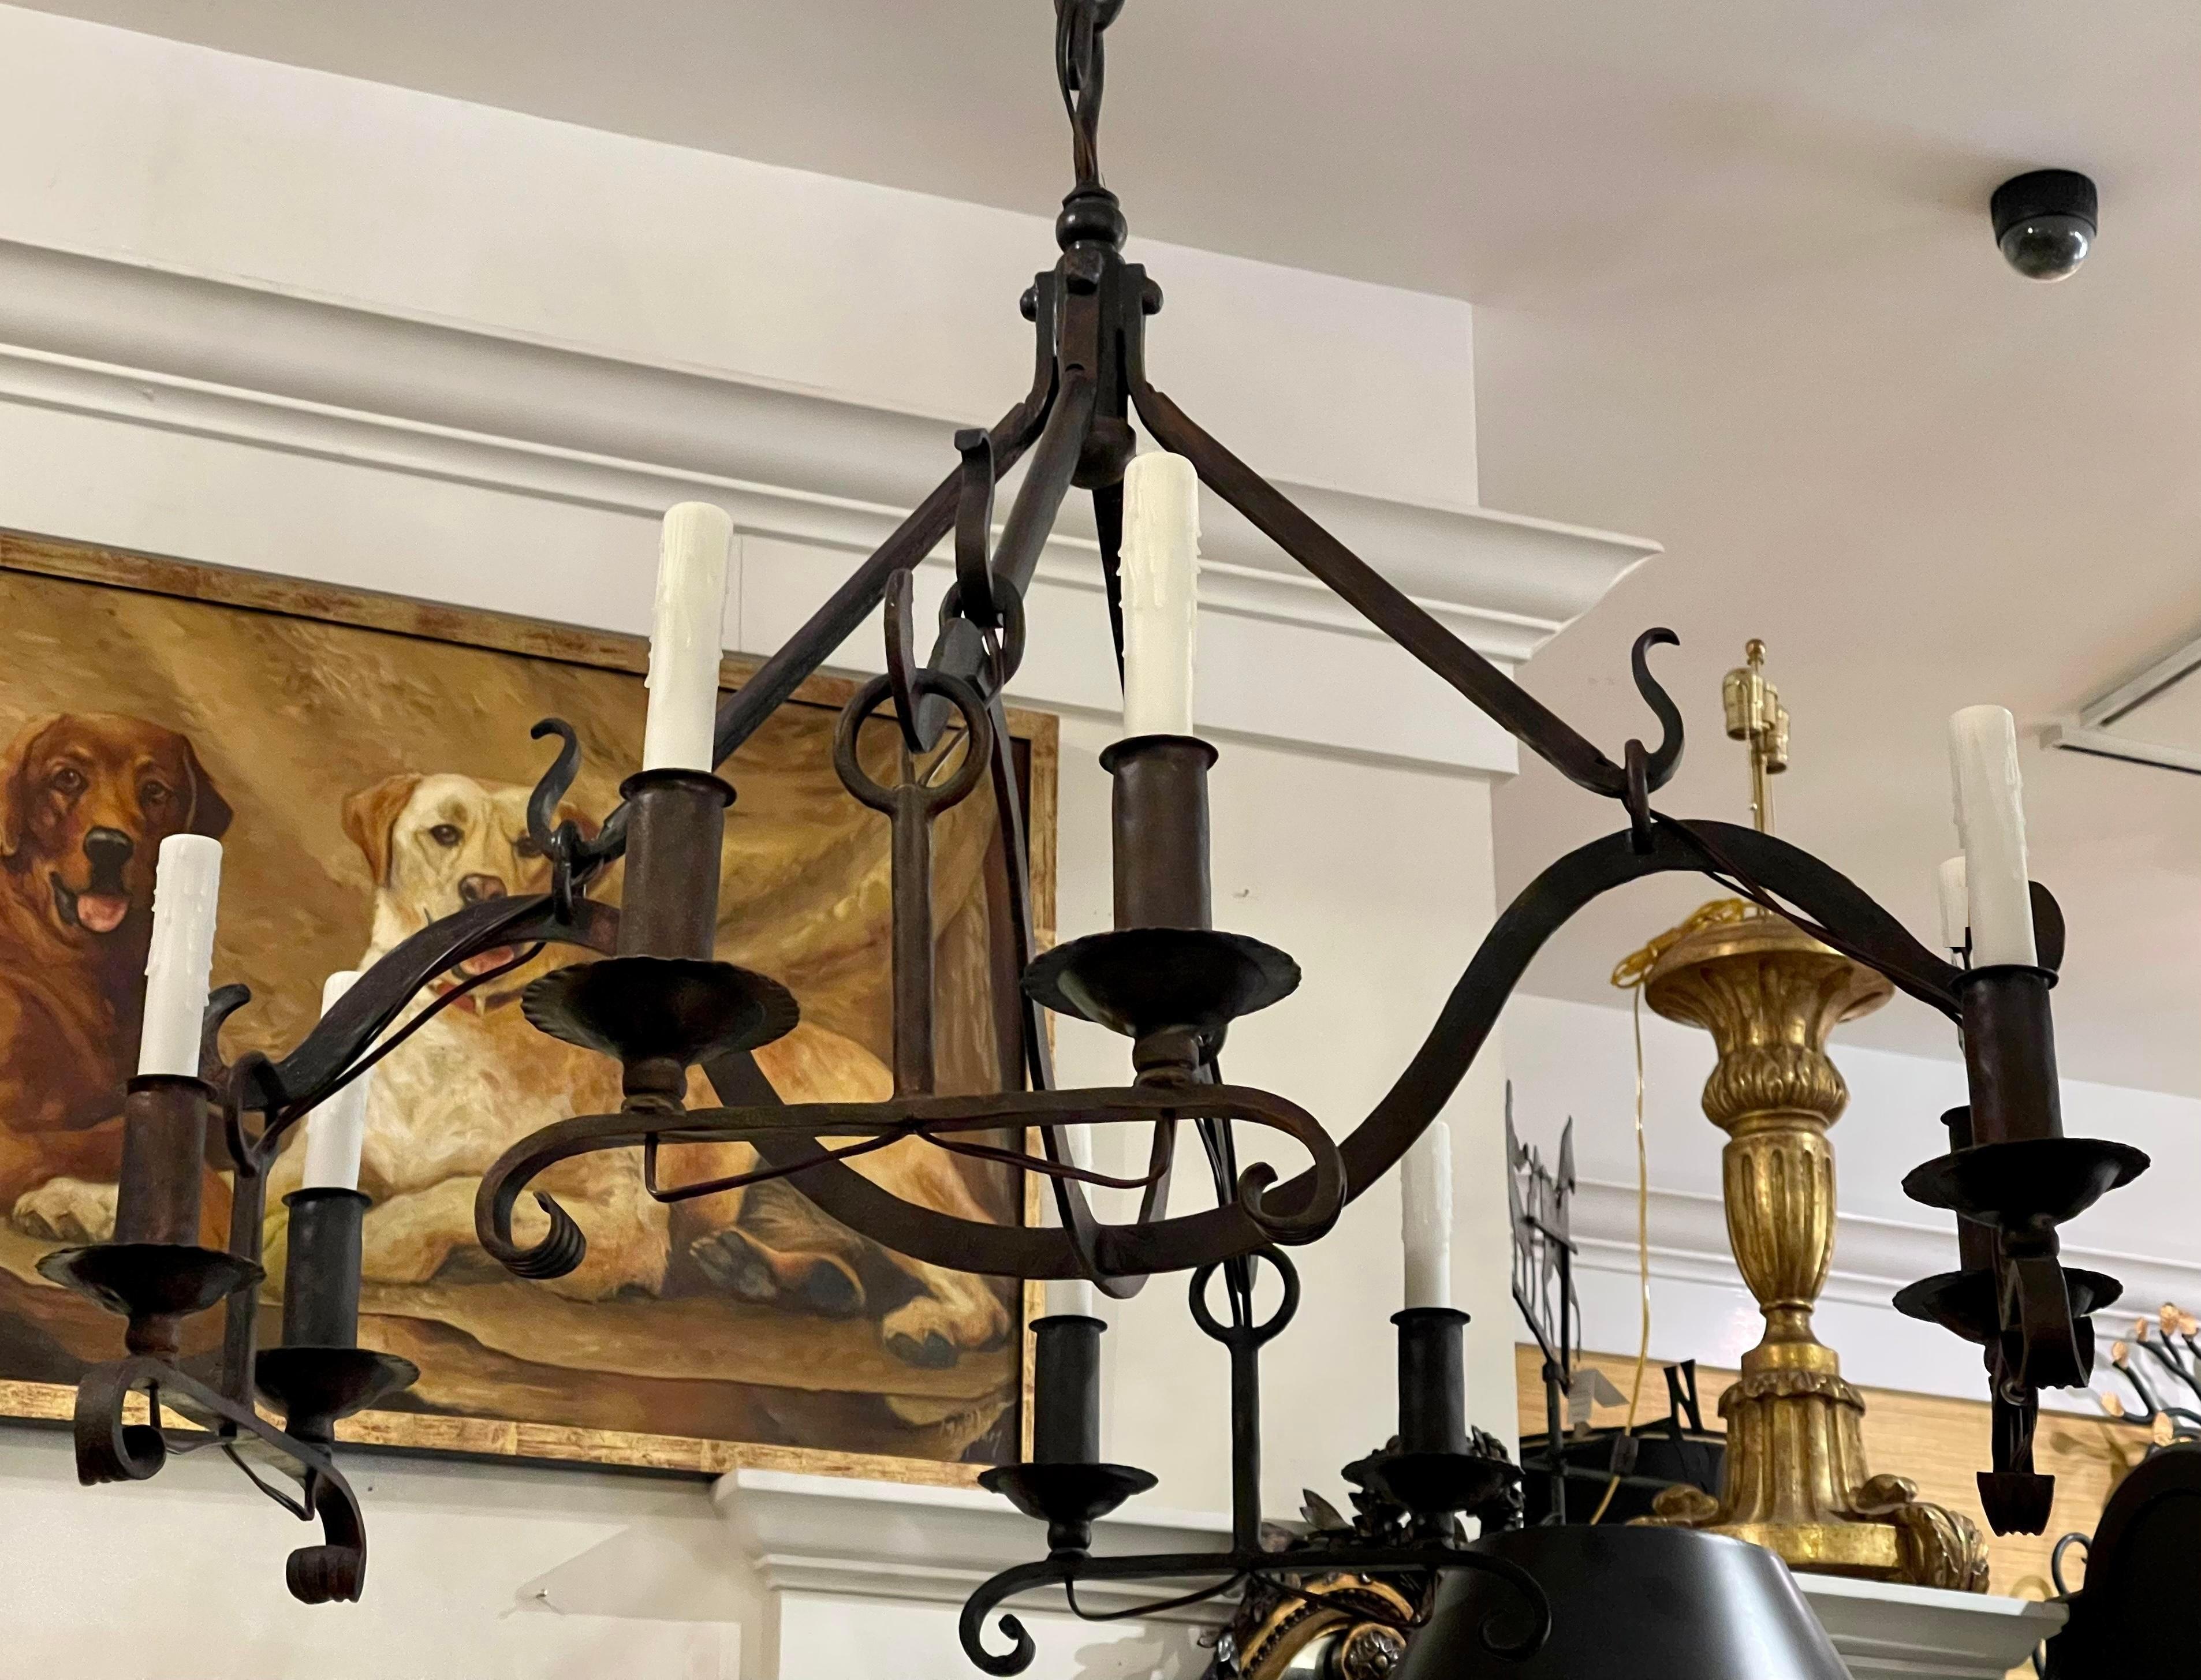 Spanish Colonial 18th C Style Dennis & Leen Gothic Wrought Iron Chandelier